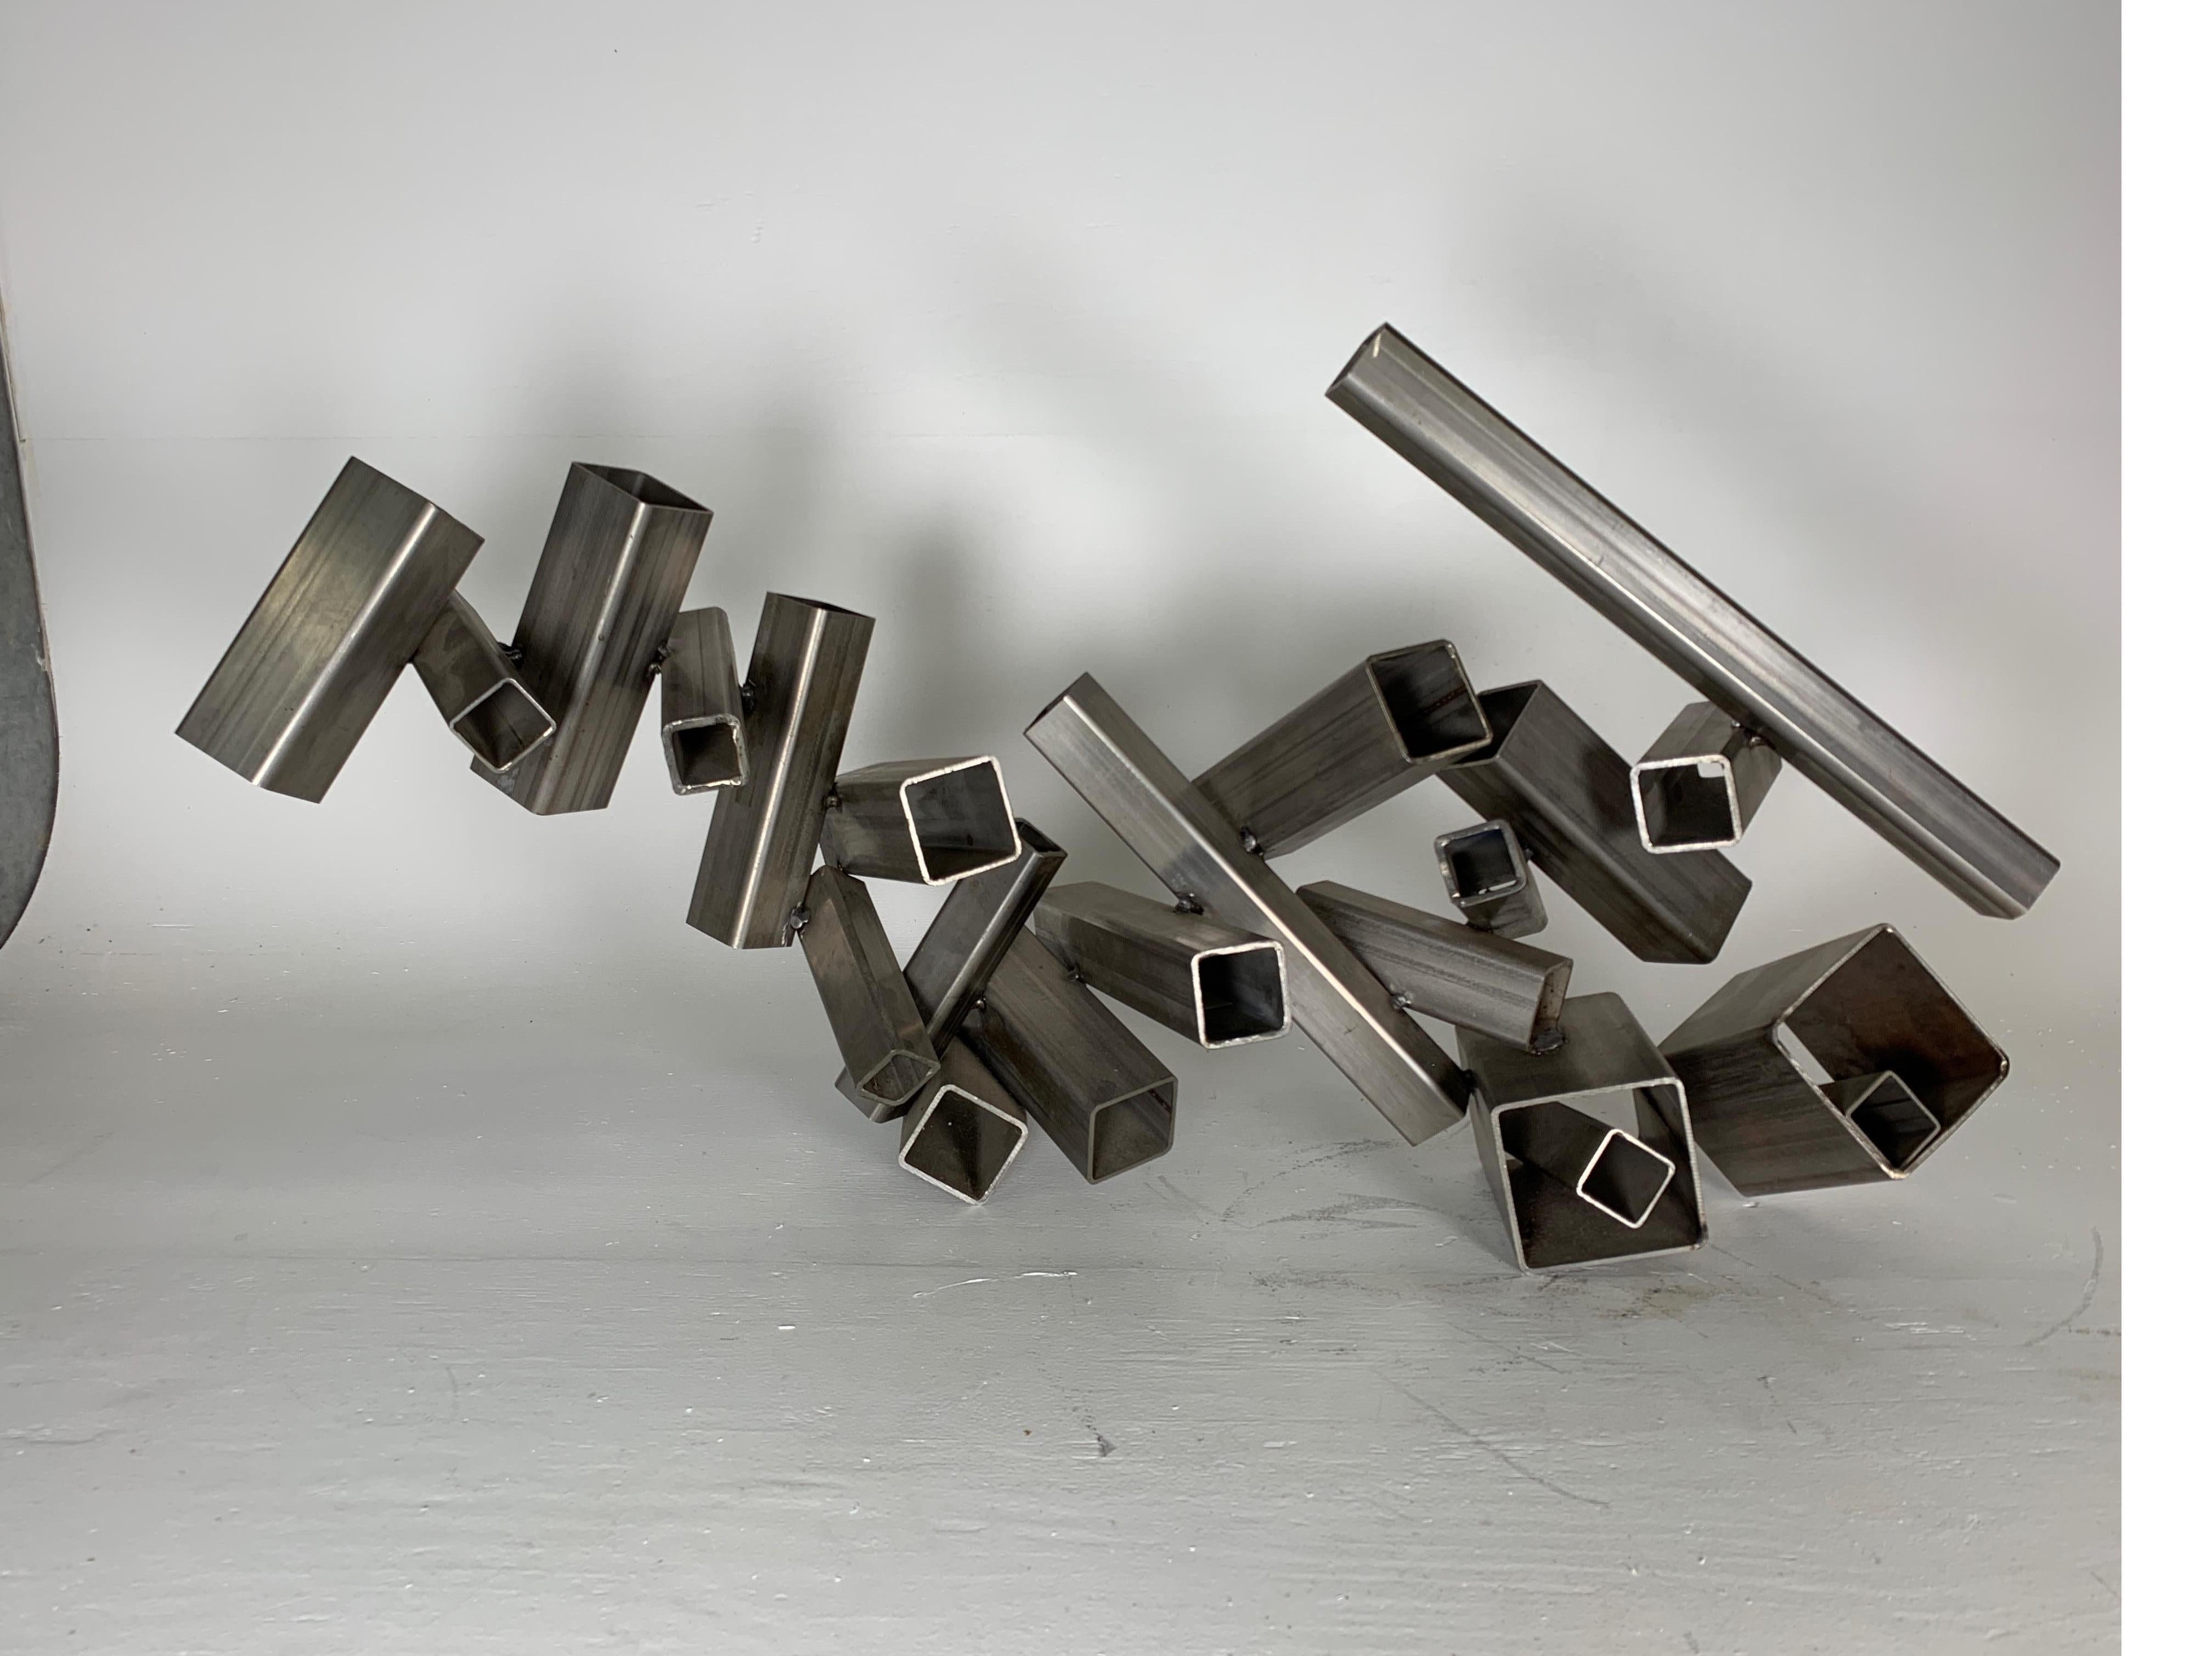 Large table sculpture in welded steel by David Phillips, acquired from collection of the artist.

Trained as an architect at Penn State in the 1960s, David Phillips has had a long and productive relationship with sculpture. From the 1970s until